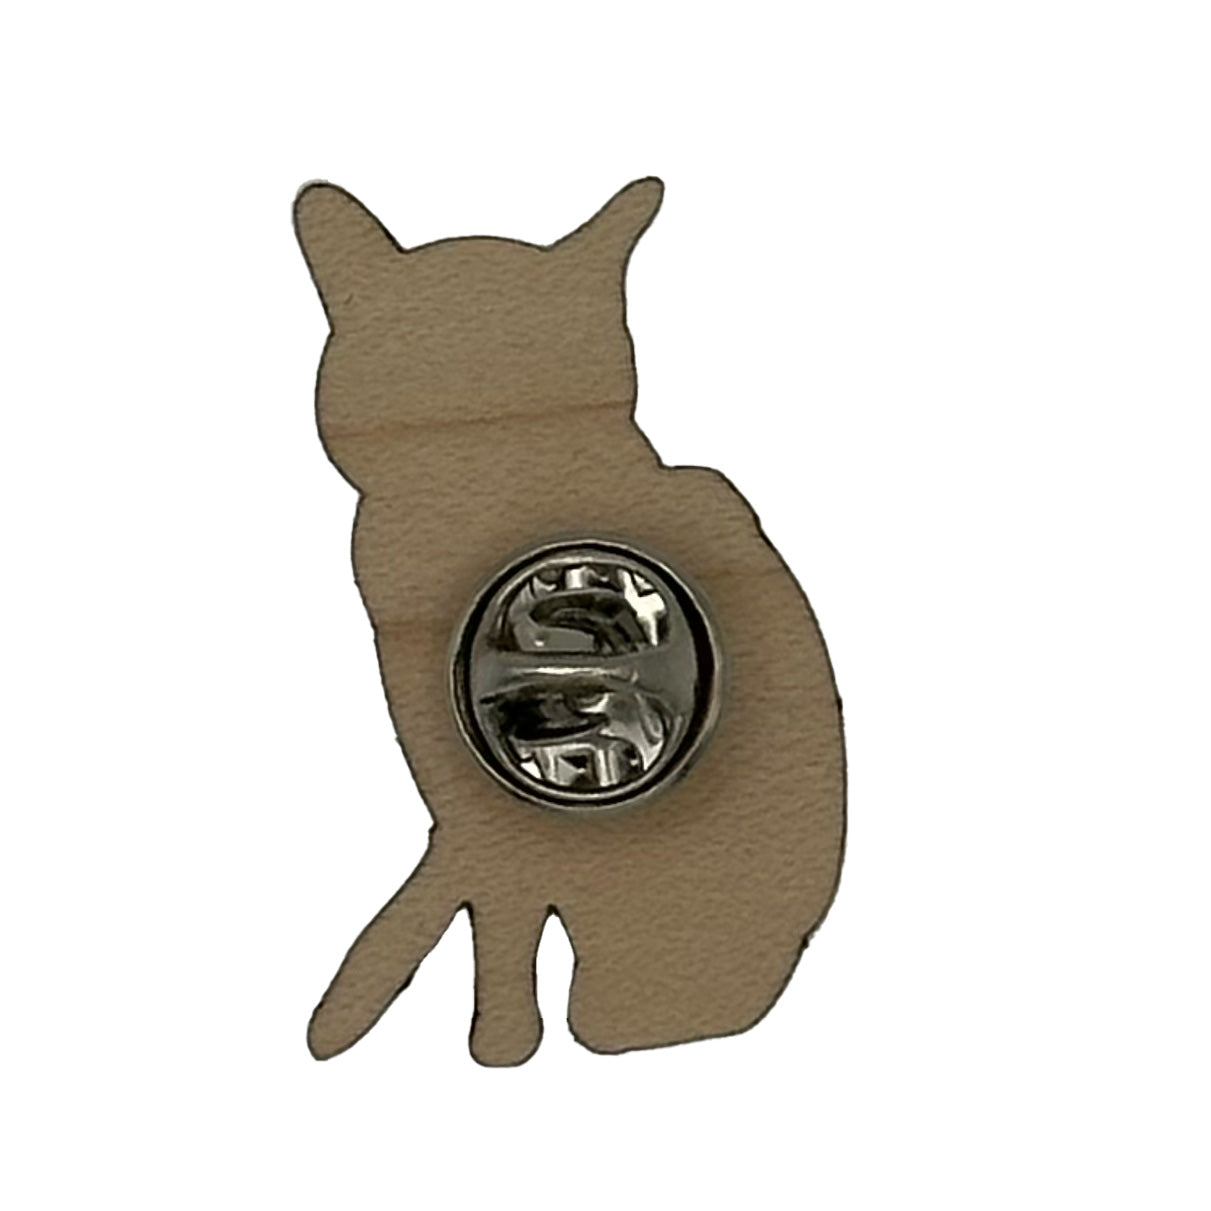 Black and White Tuxedo Cat  pin badge showing the reverse